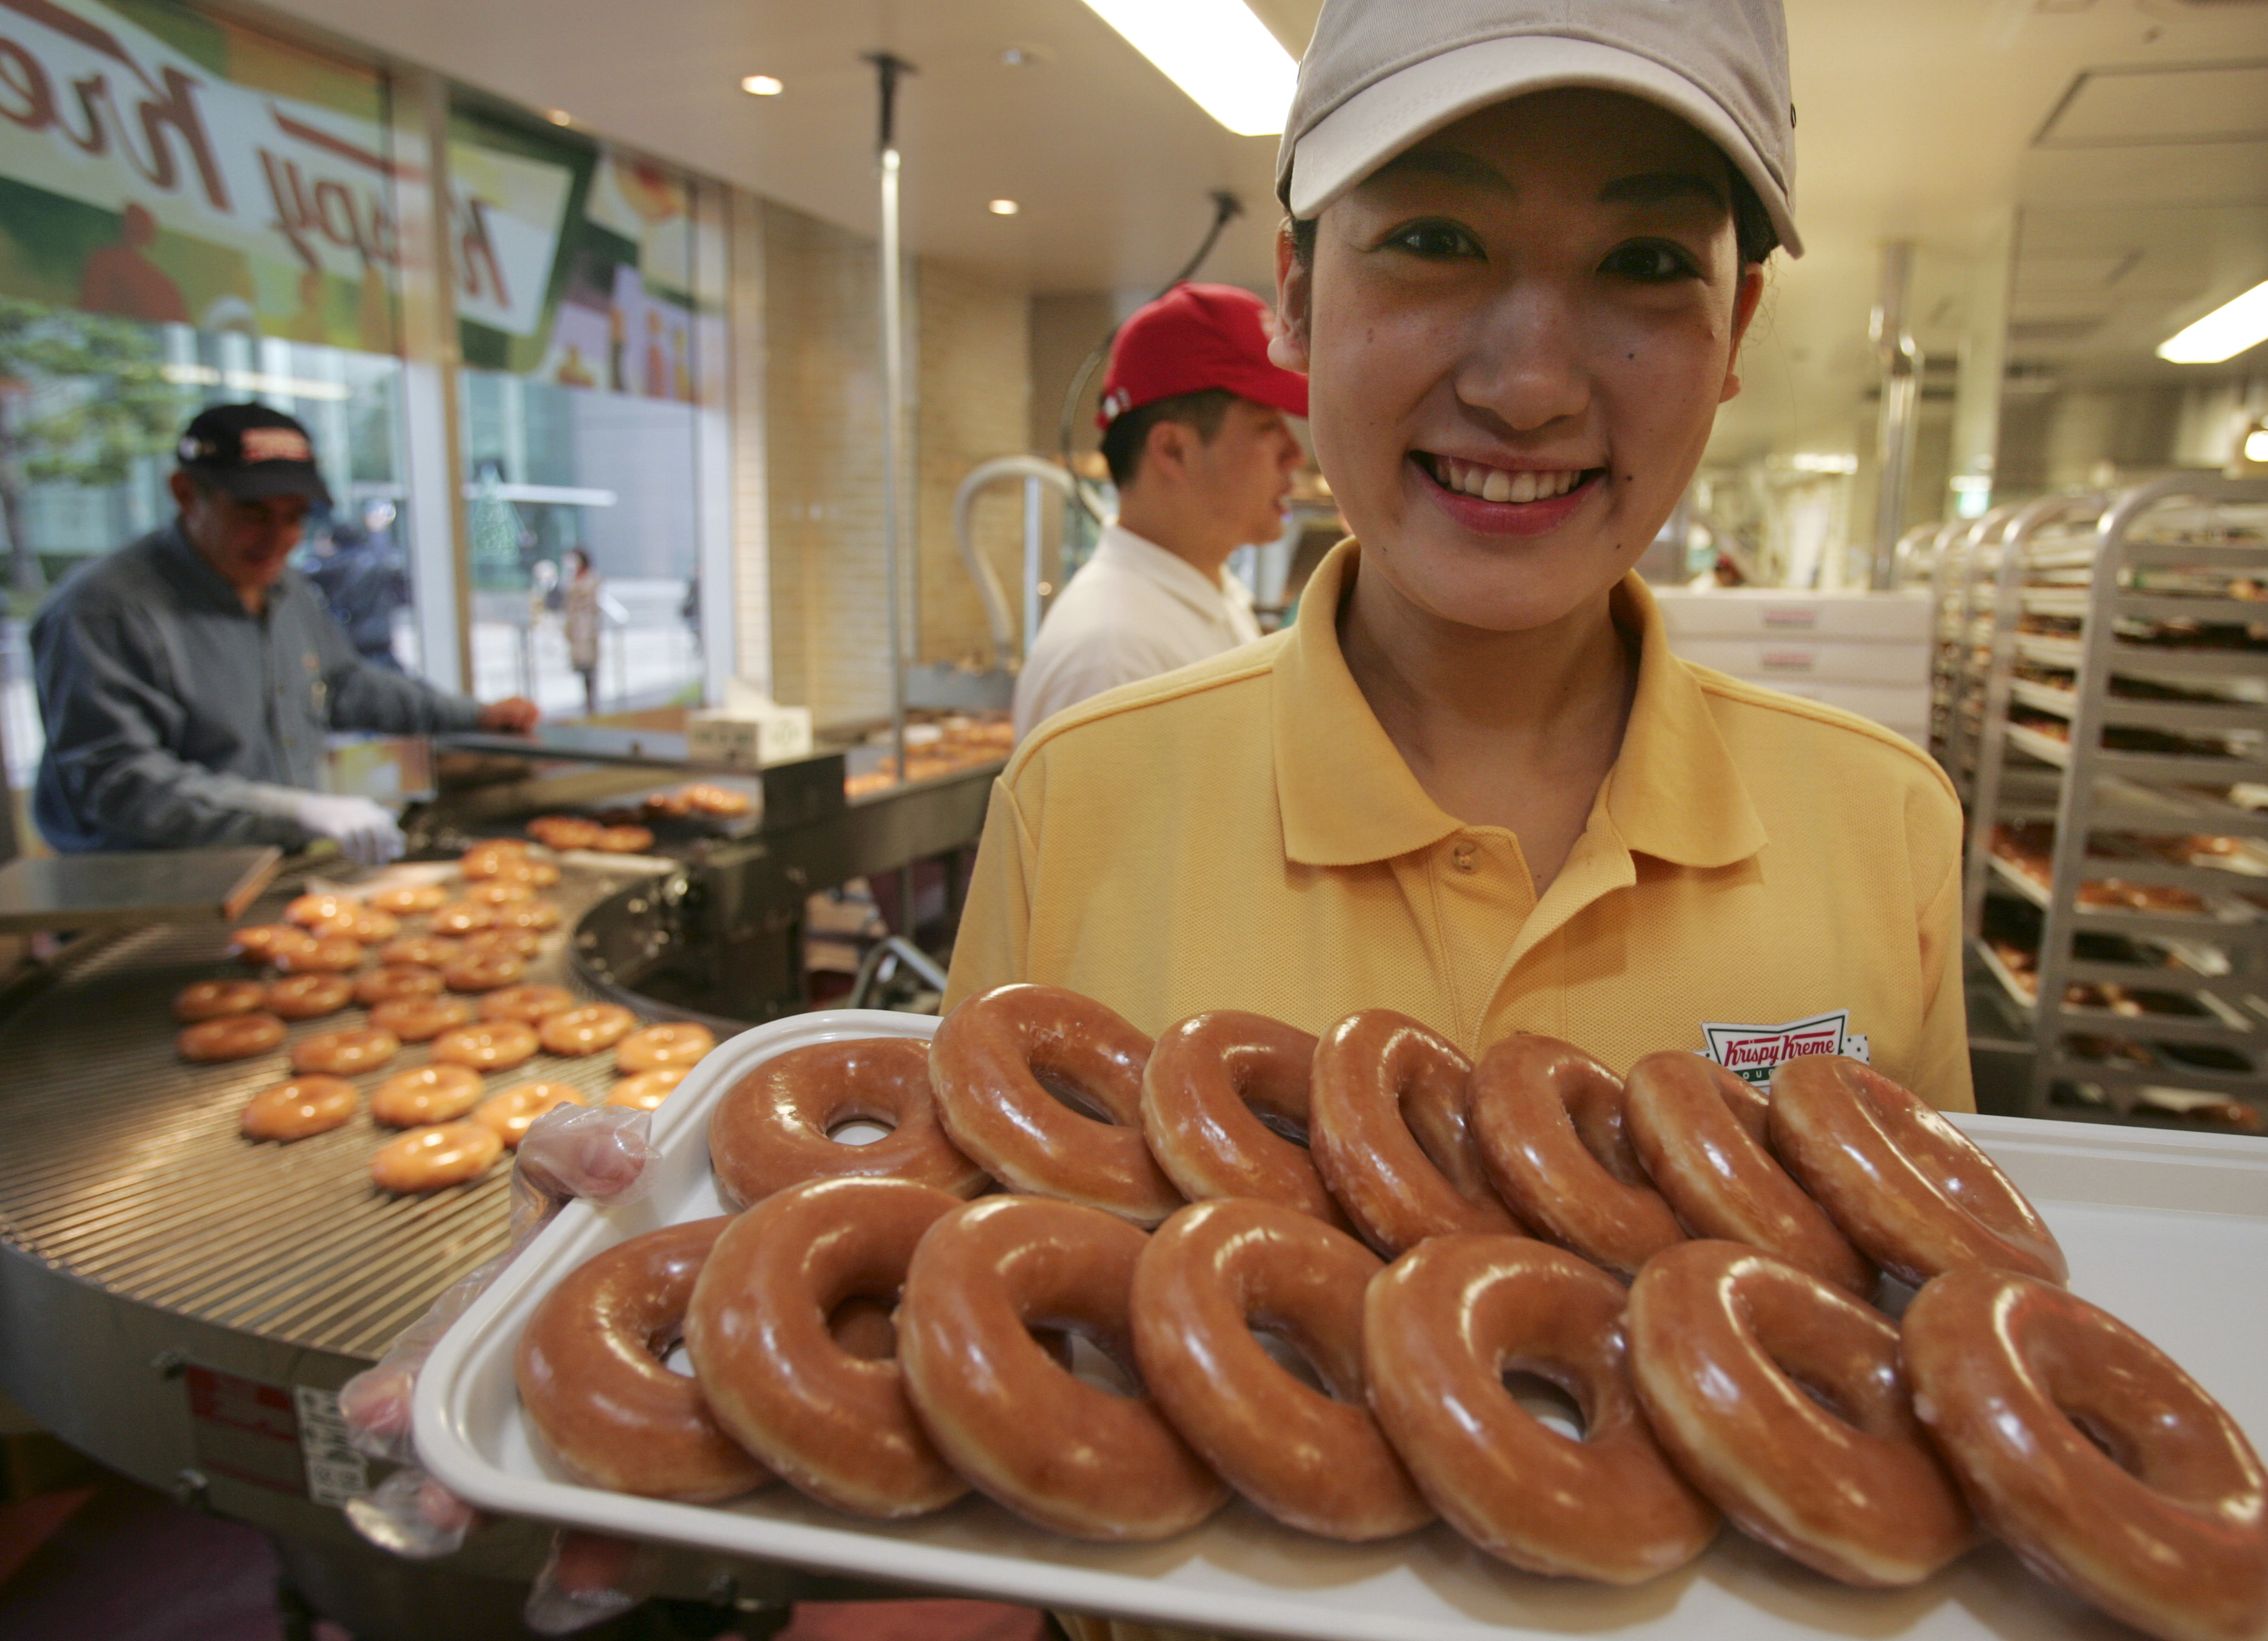 Store attendant poses with a tray of fresh doughnuts at a new Krispy Kreme shop in Tokyo